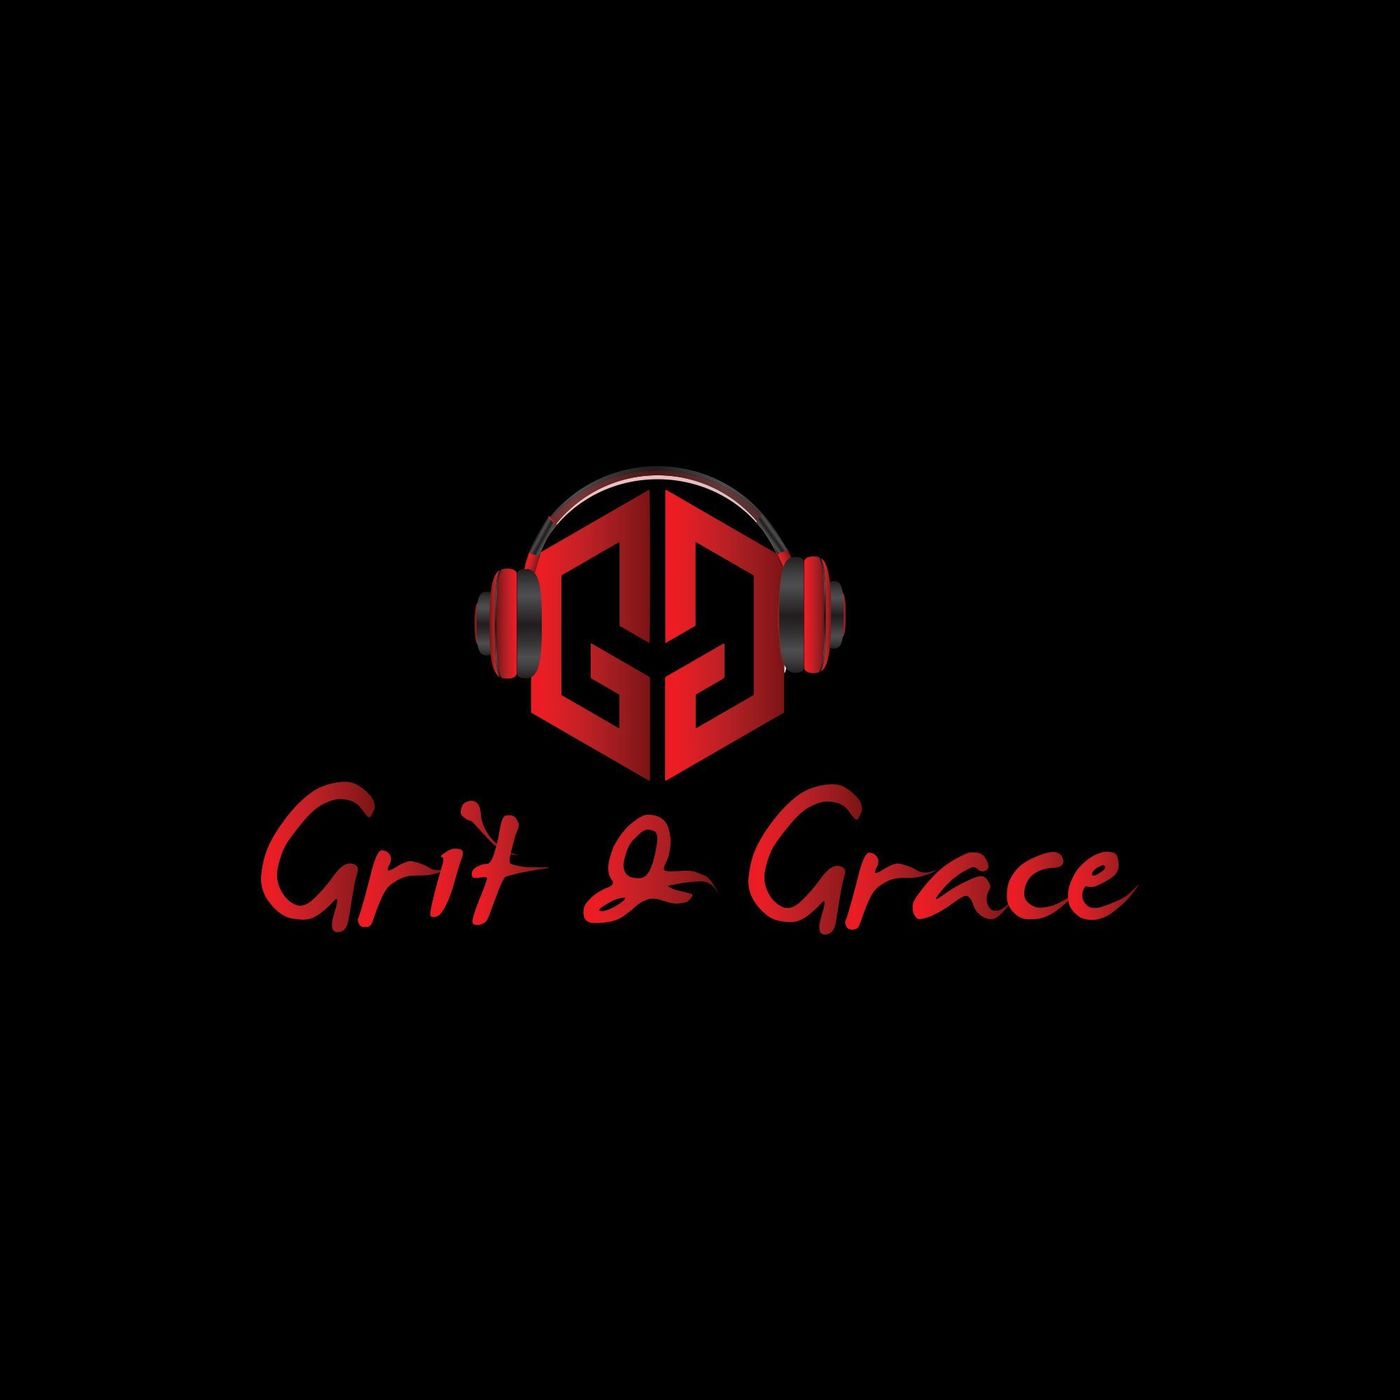 Grit and Grace: The Mistress of Marketing